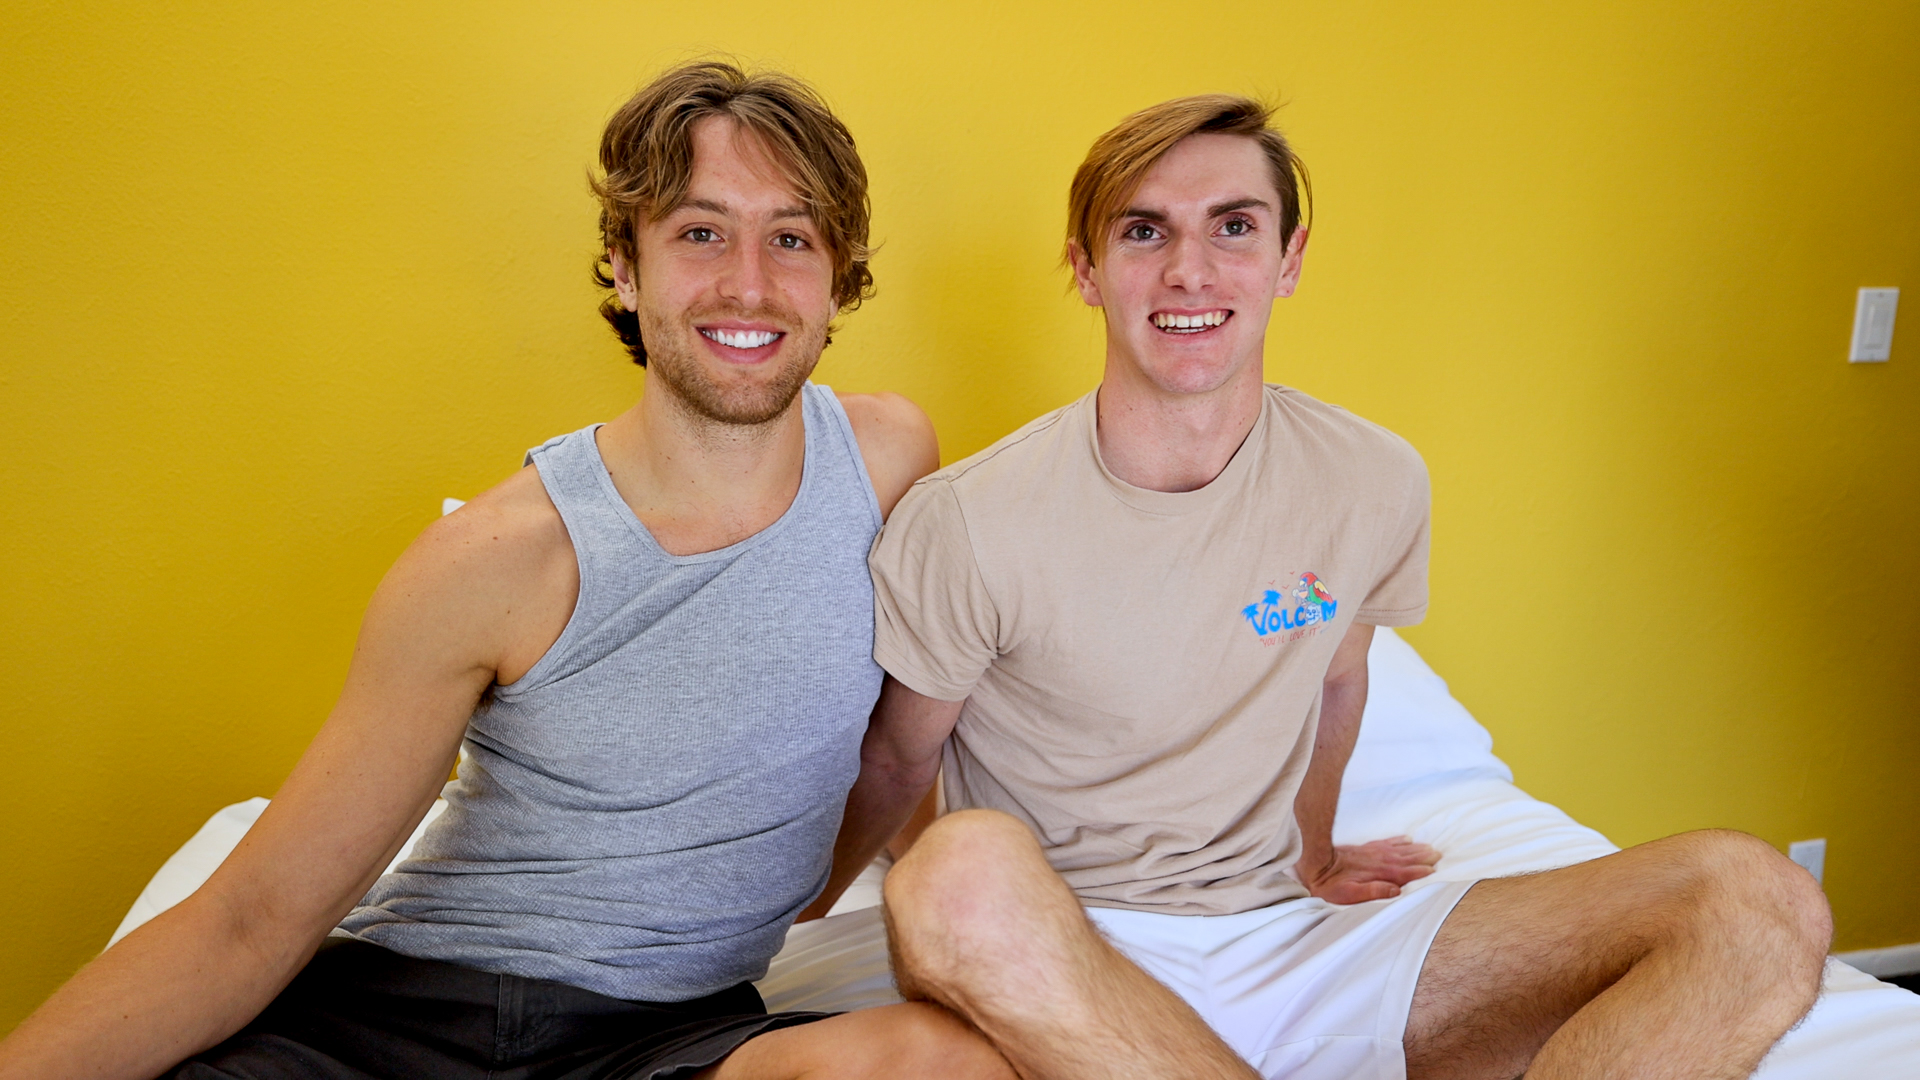 Thomas Fry & Thomas Rosewood Get Excited For Their Hot Hookup